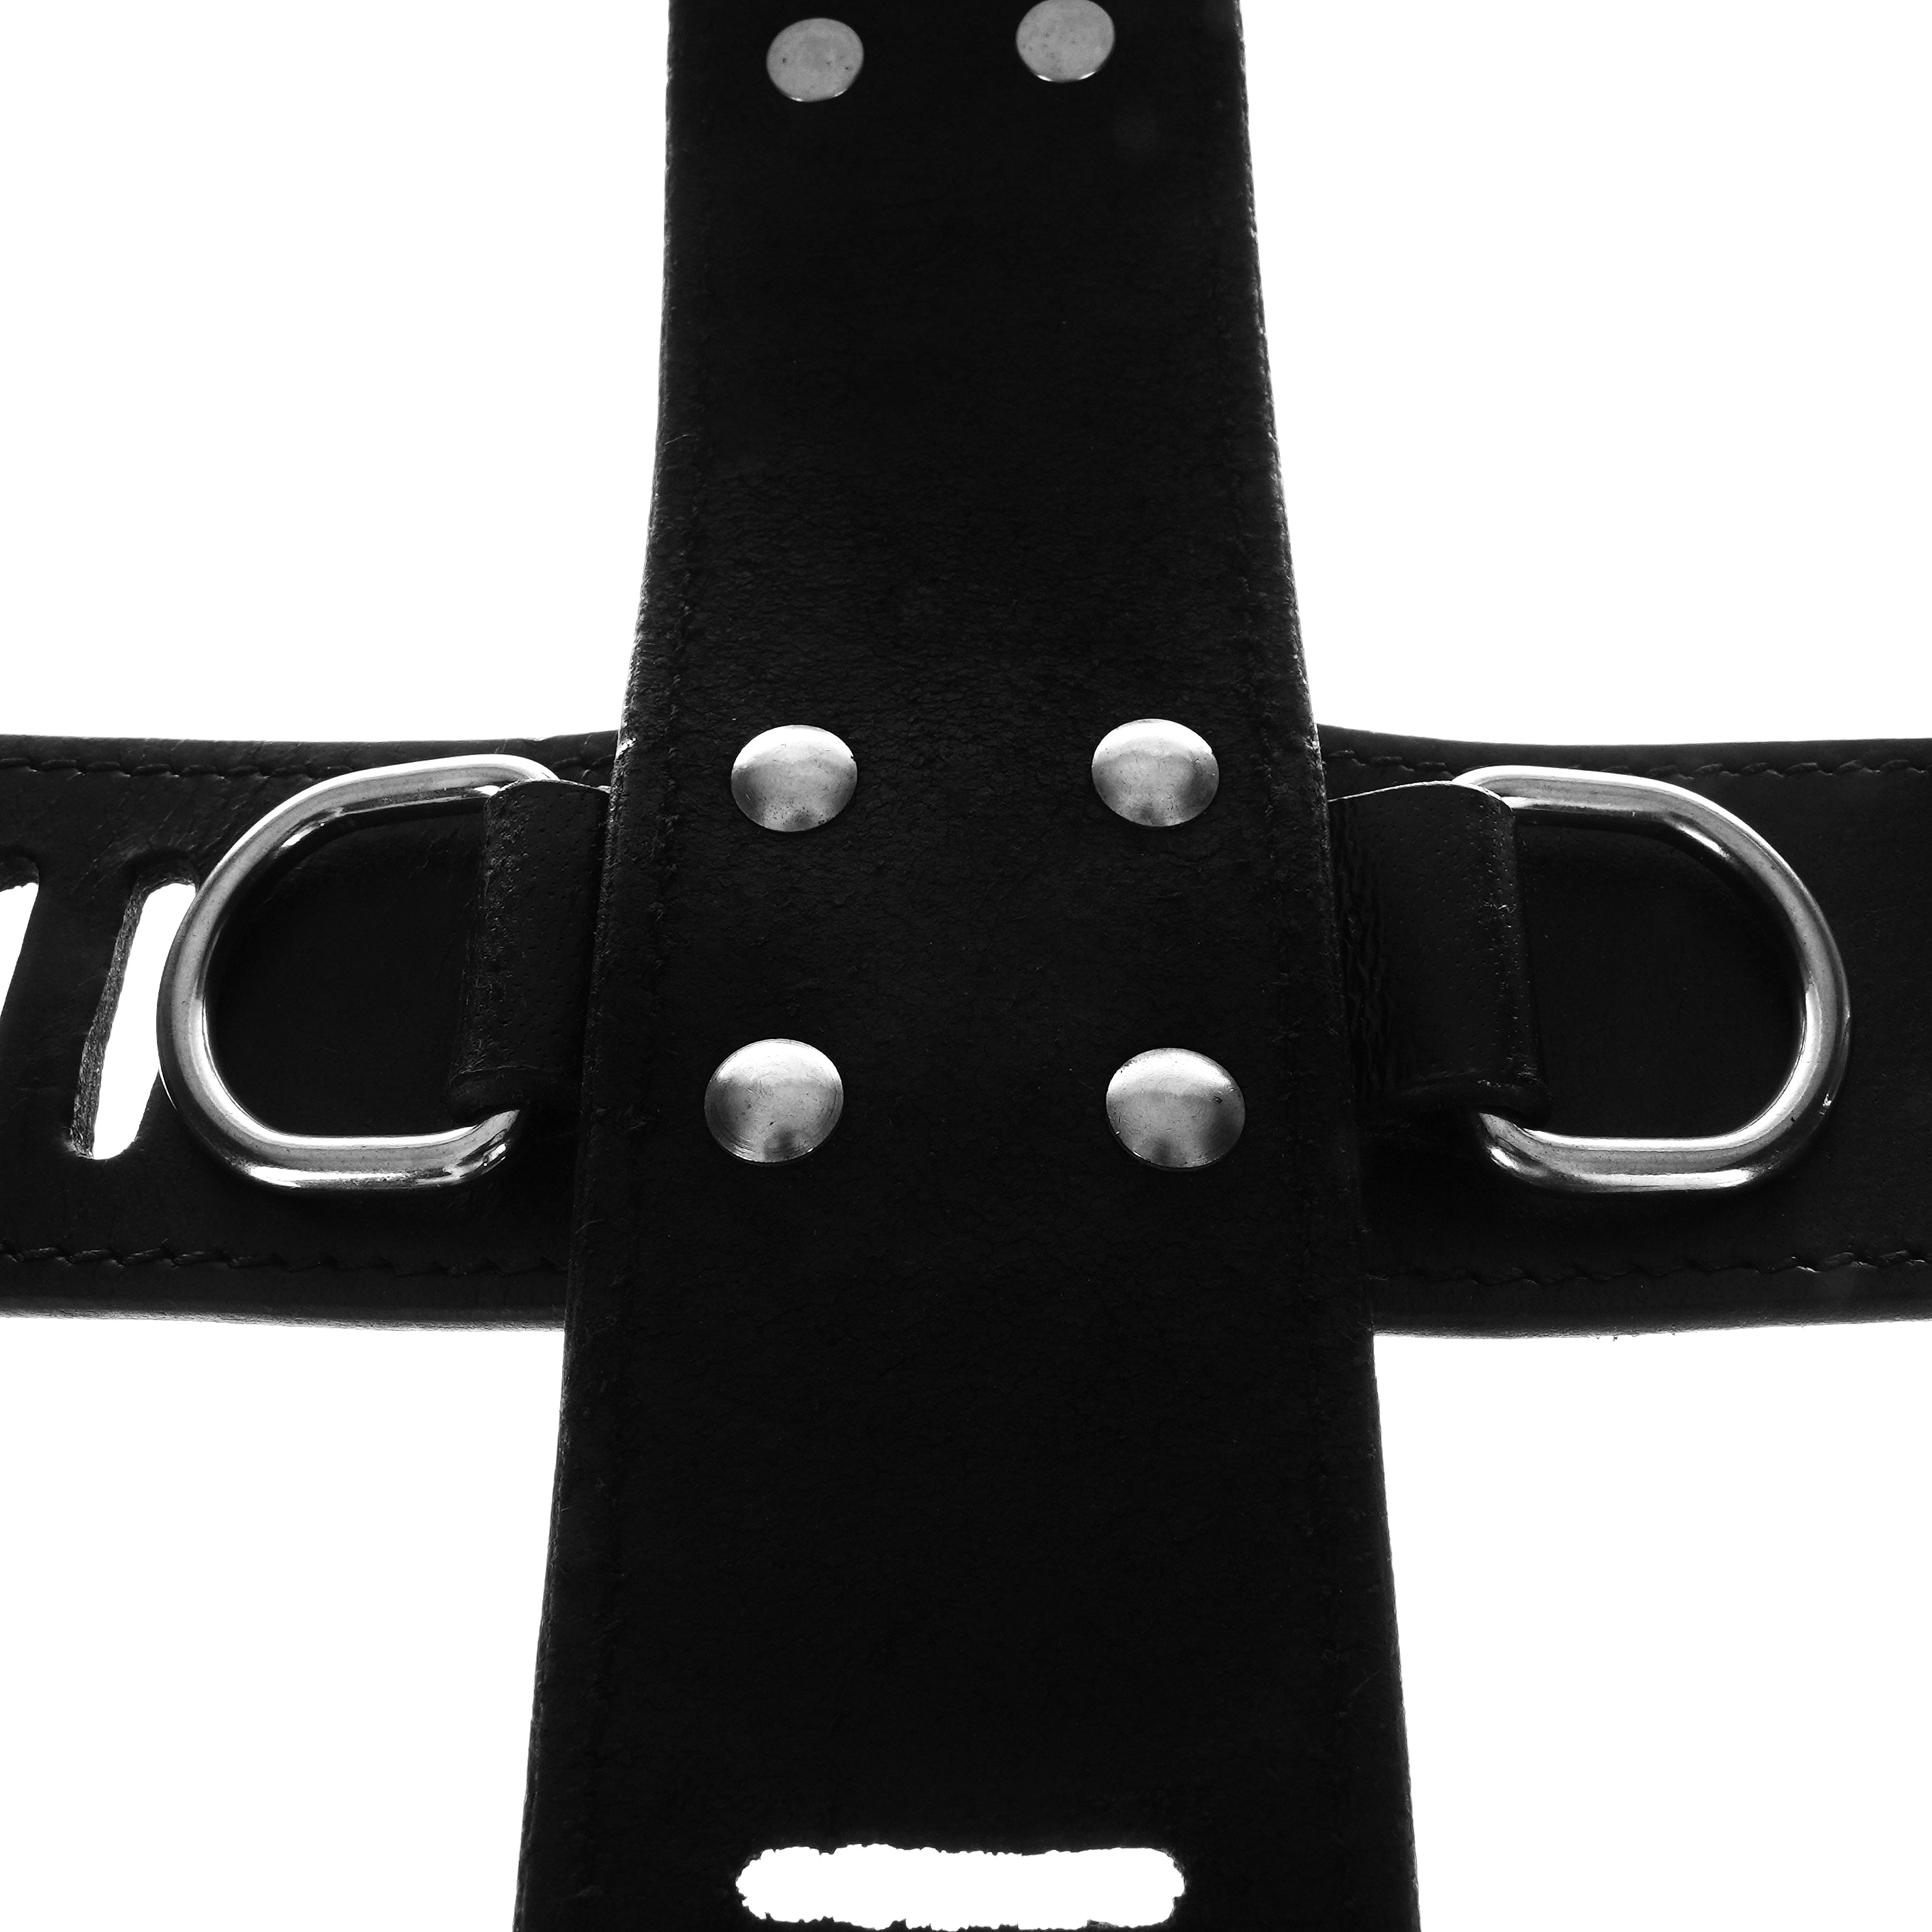 Core by Kink Secure Cross Cuff with D-rings and Locks